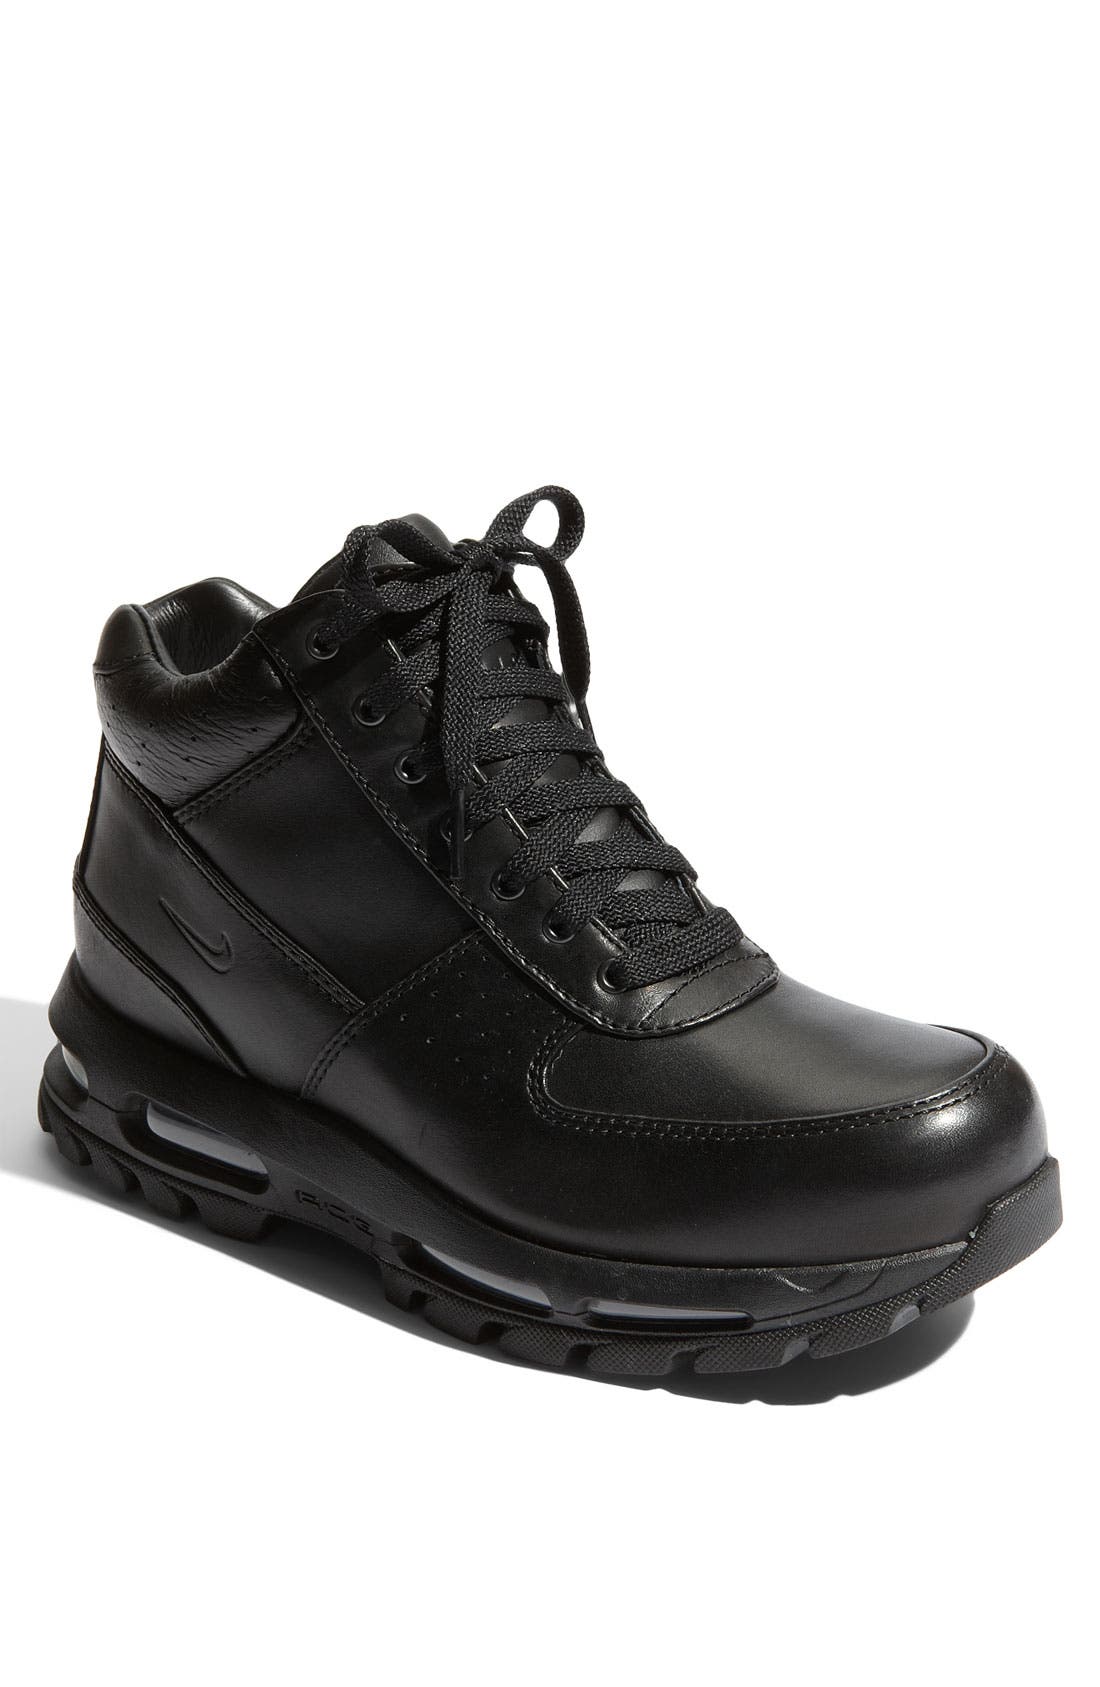 acg boots for cheap